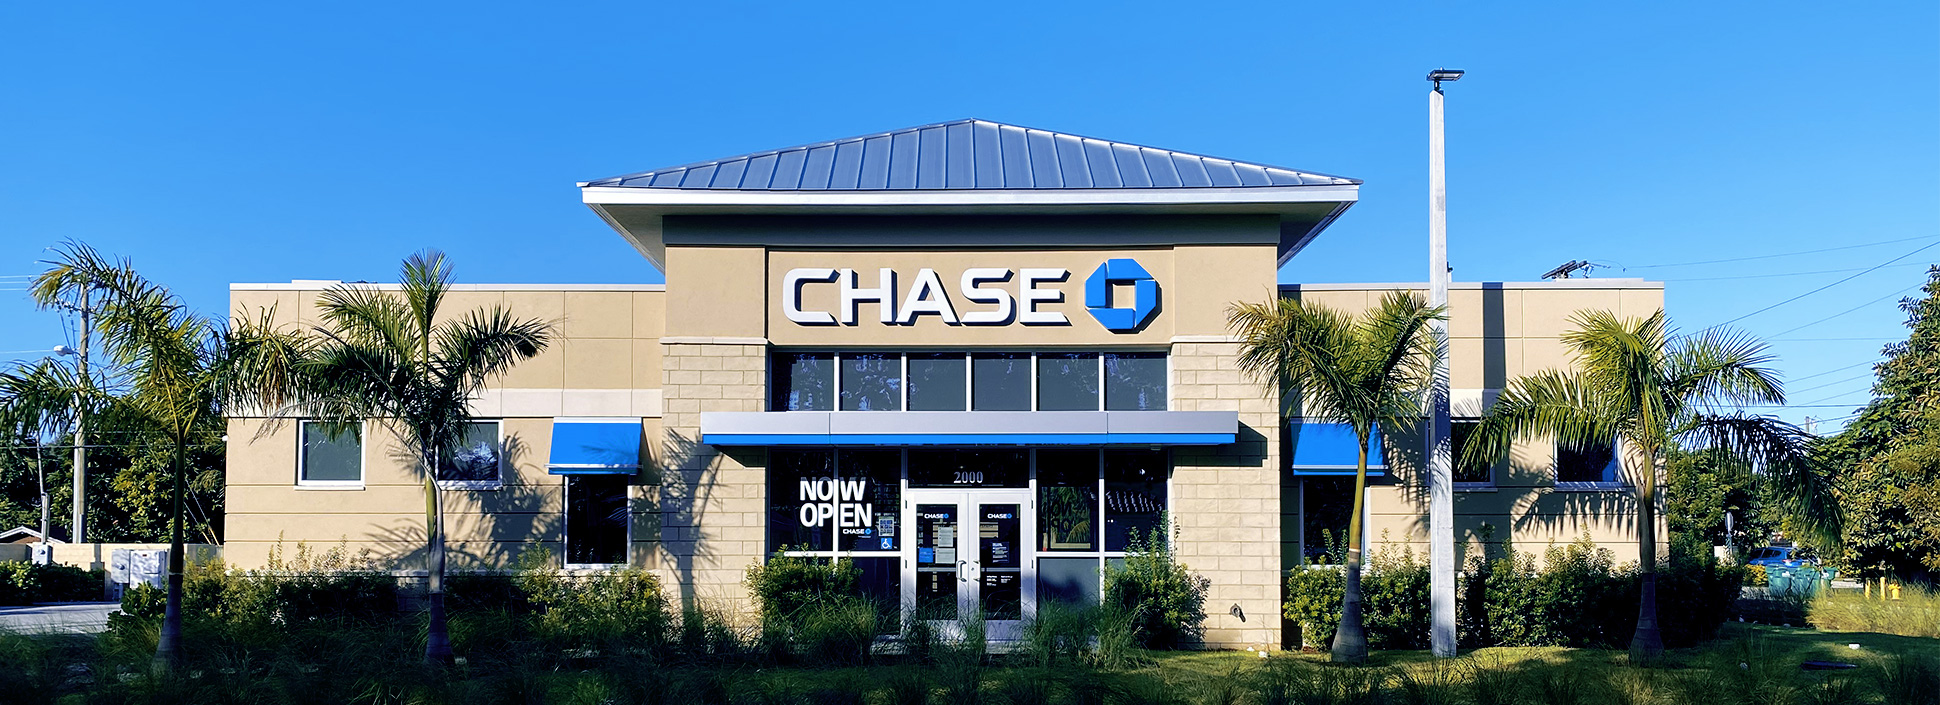 chase bank open near me now